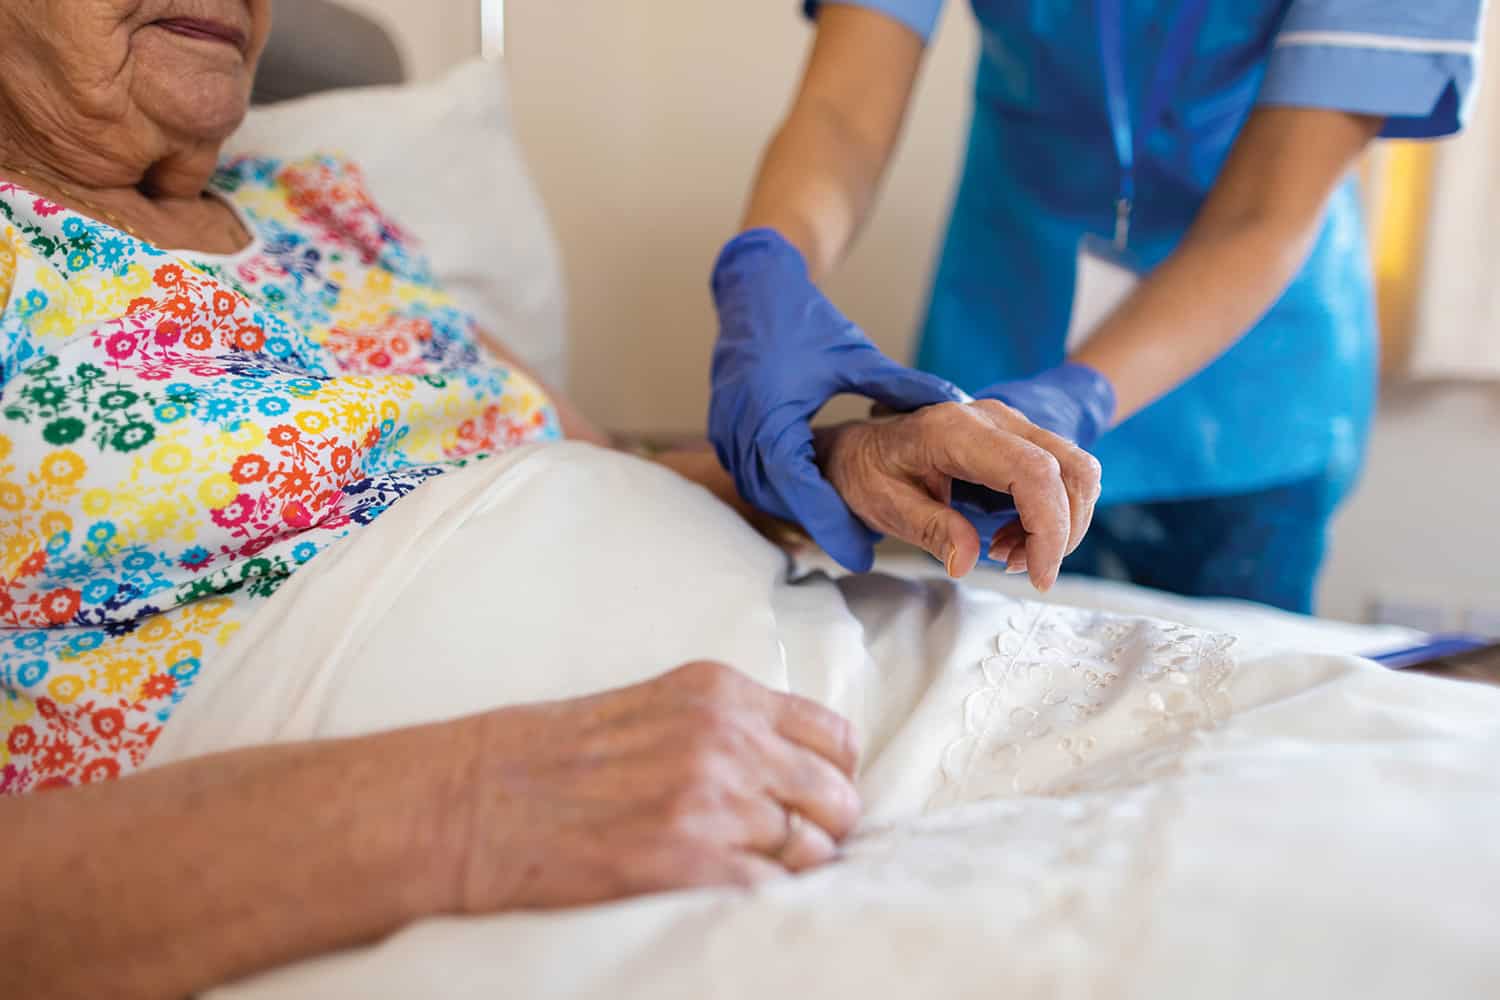 : care worker’s disposable-gloved hands holding wrist of older woman in bed wearing colourful night shirt